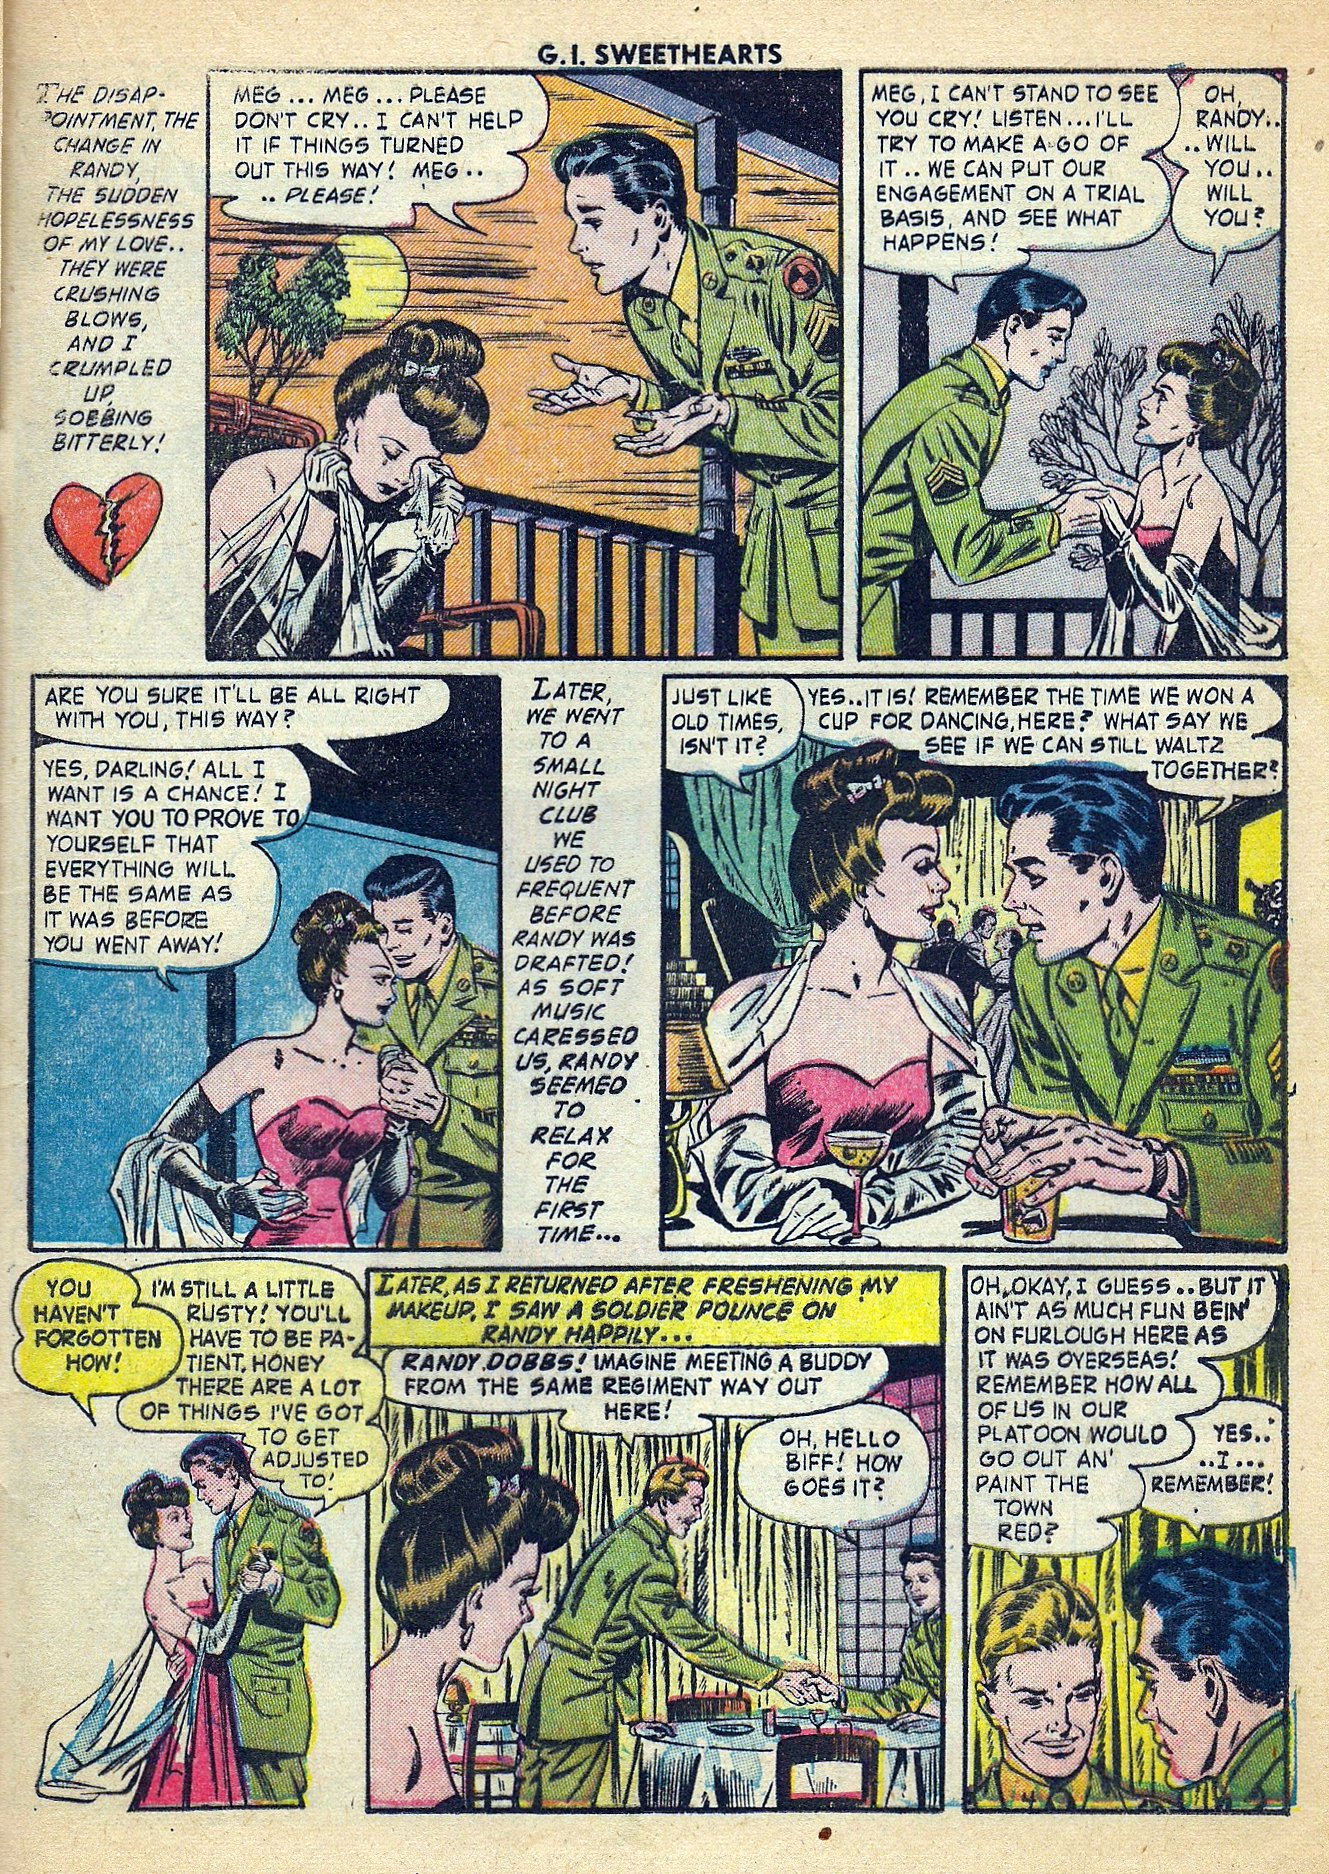 Read online G.I. Sweethearts comic -  Issue #32 - 21